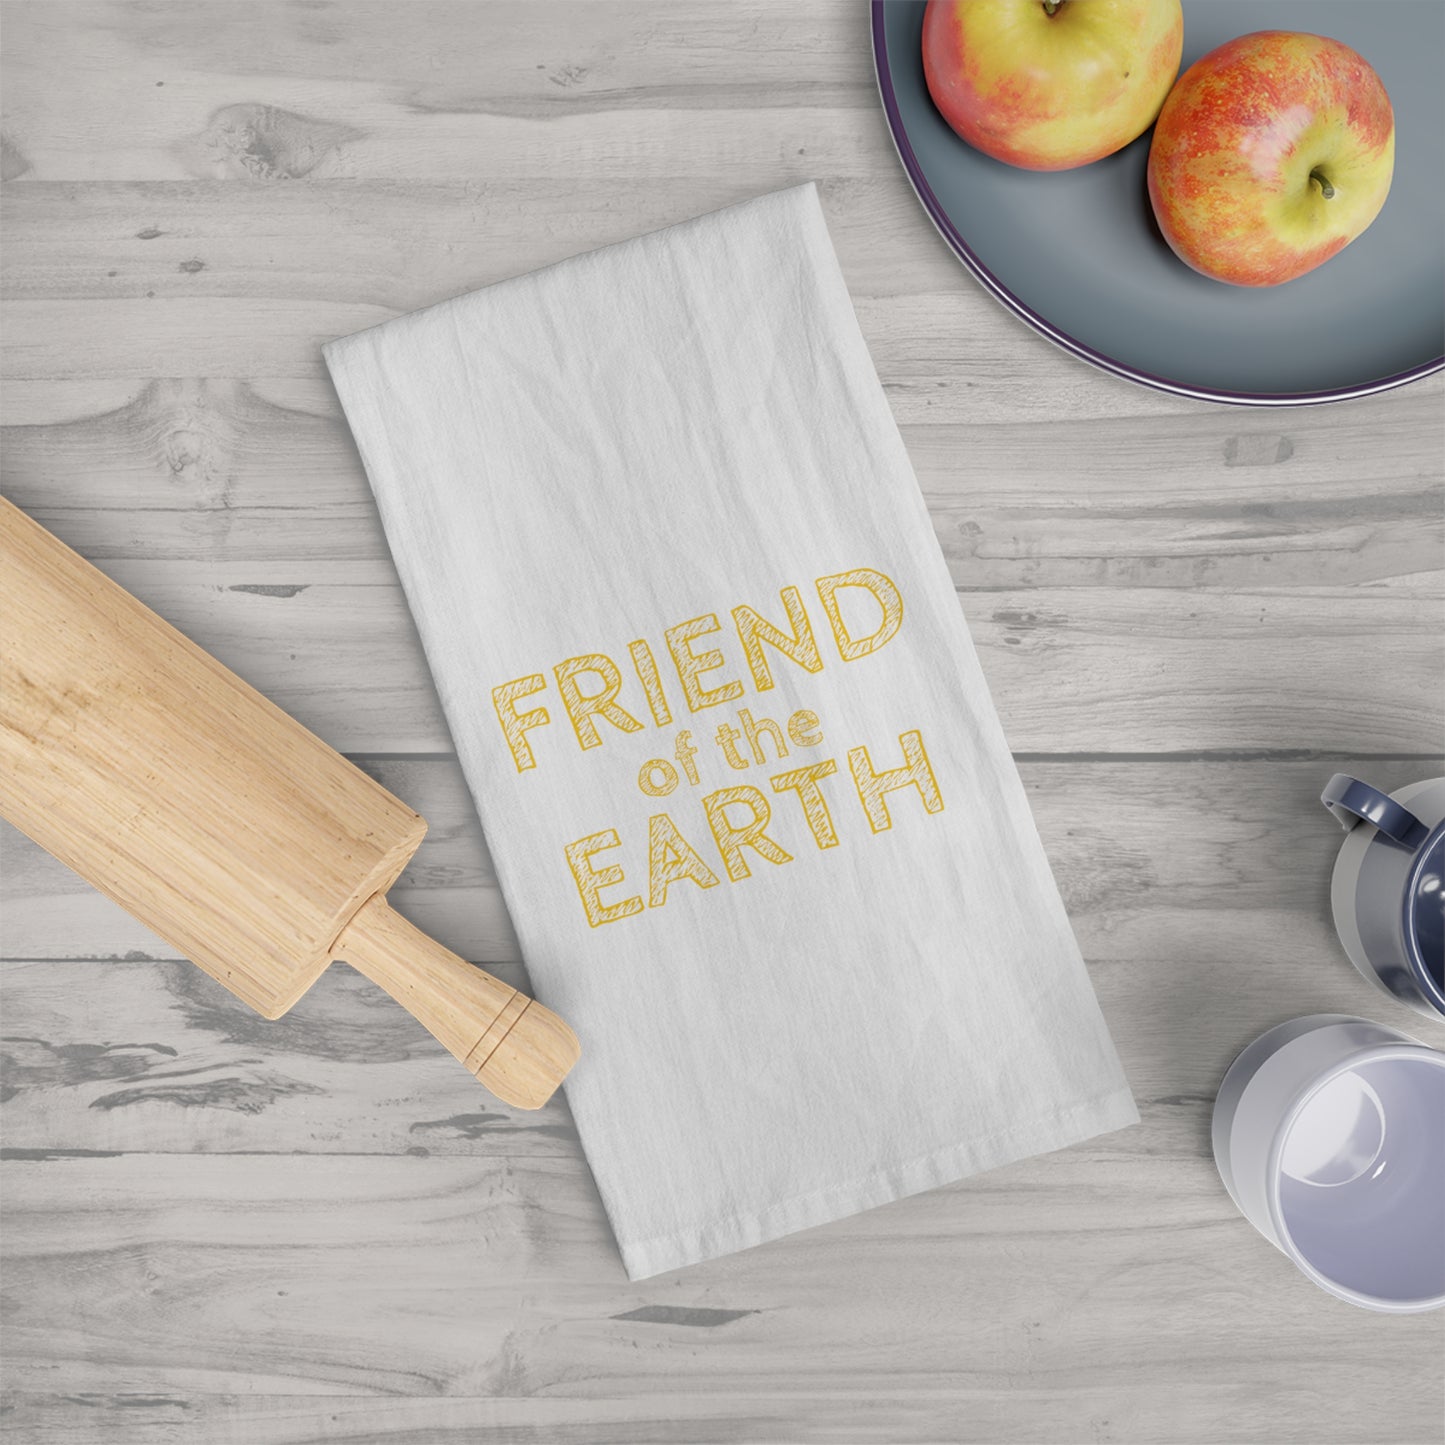 Friend of the Earth Large Cotton Dish Towel